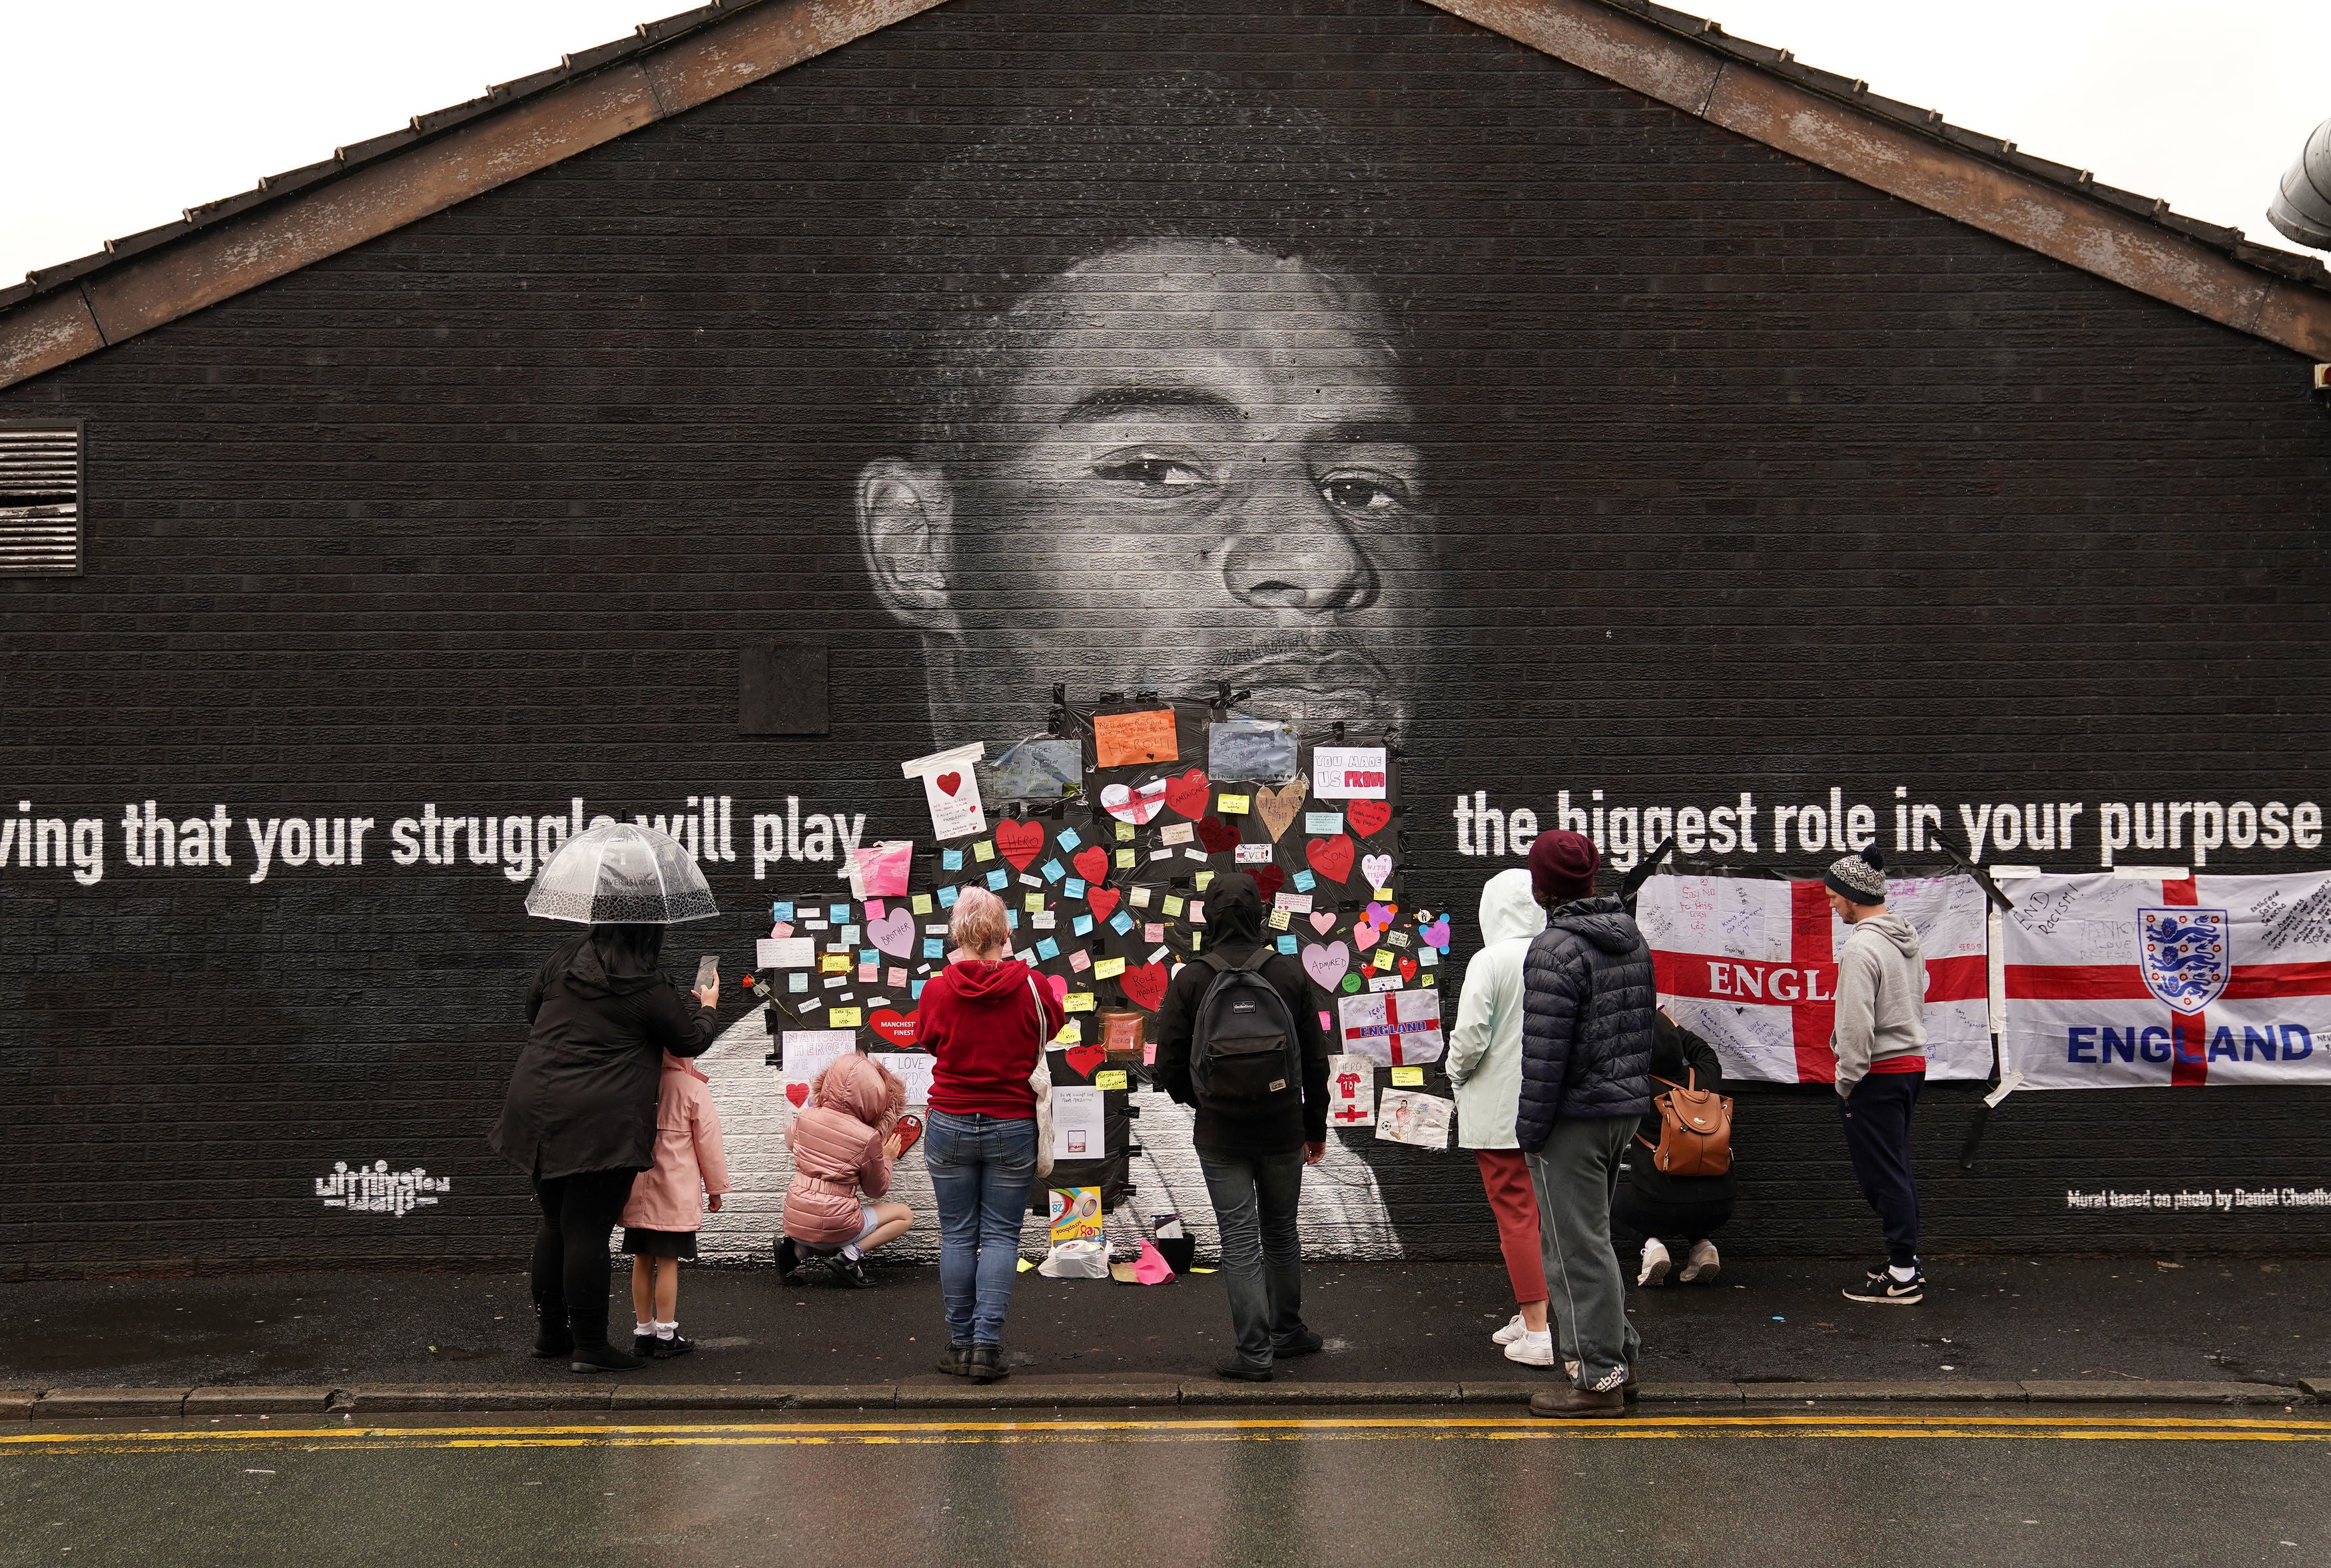 Residents continued to post messages support at the mural throughout the day